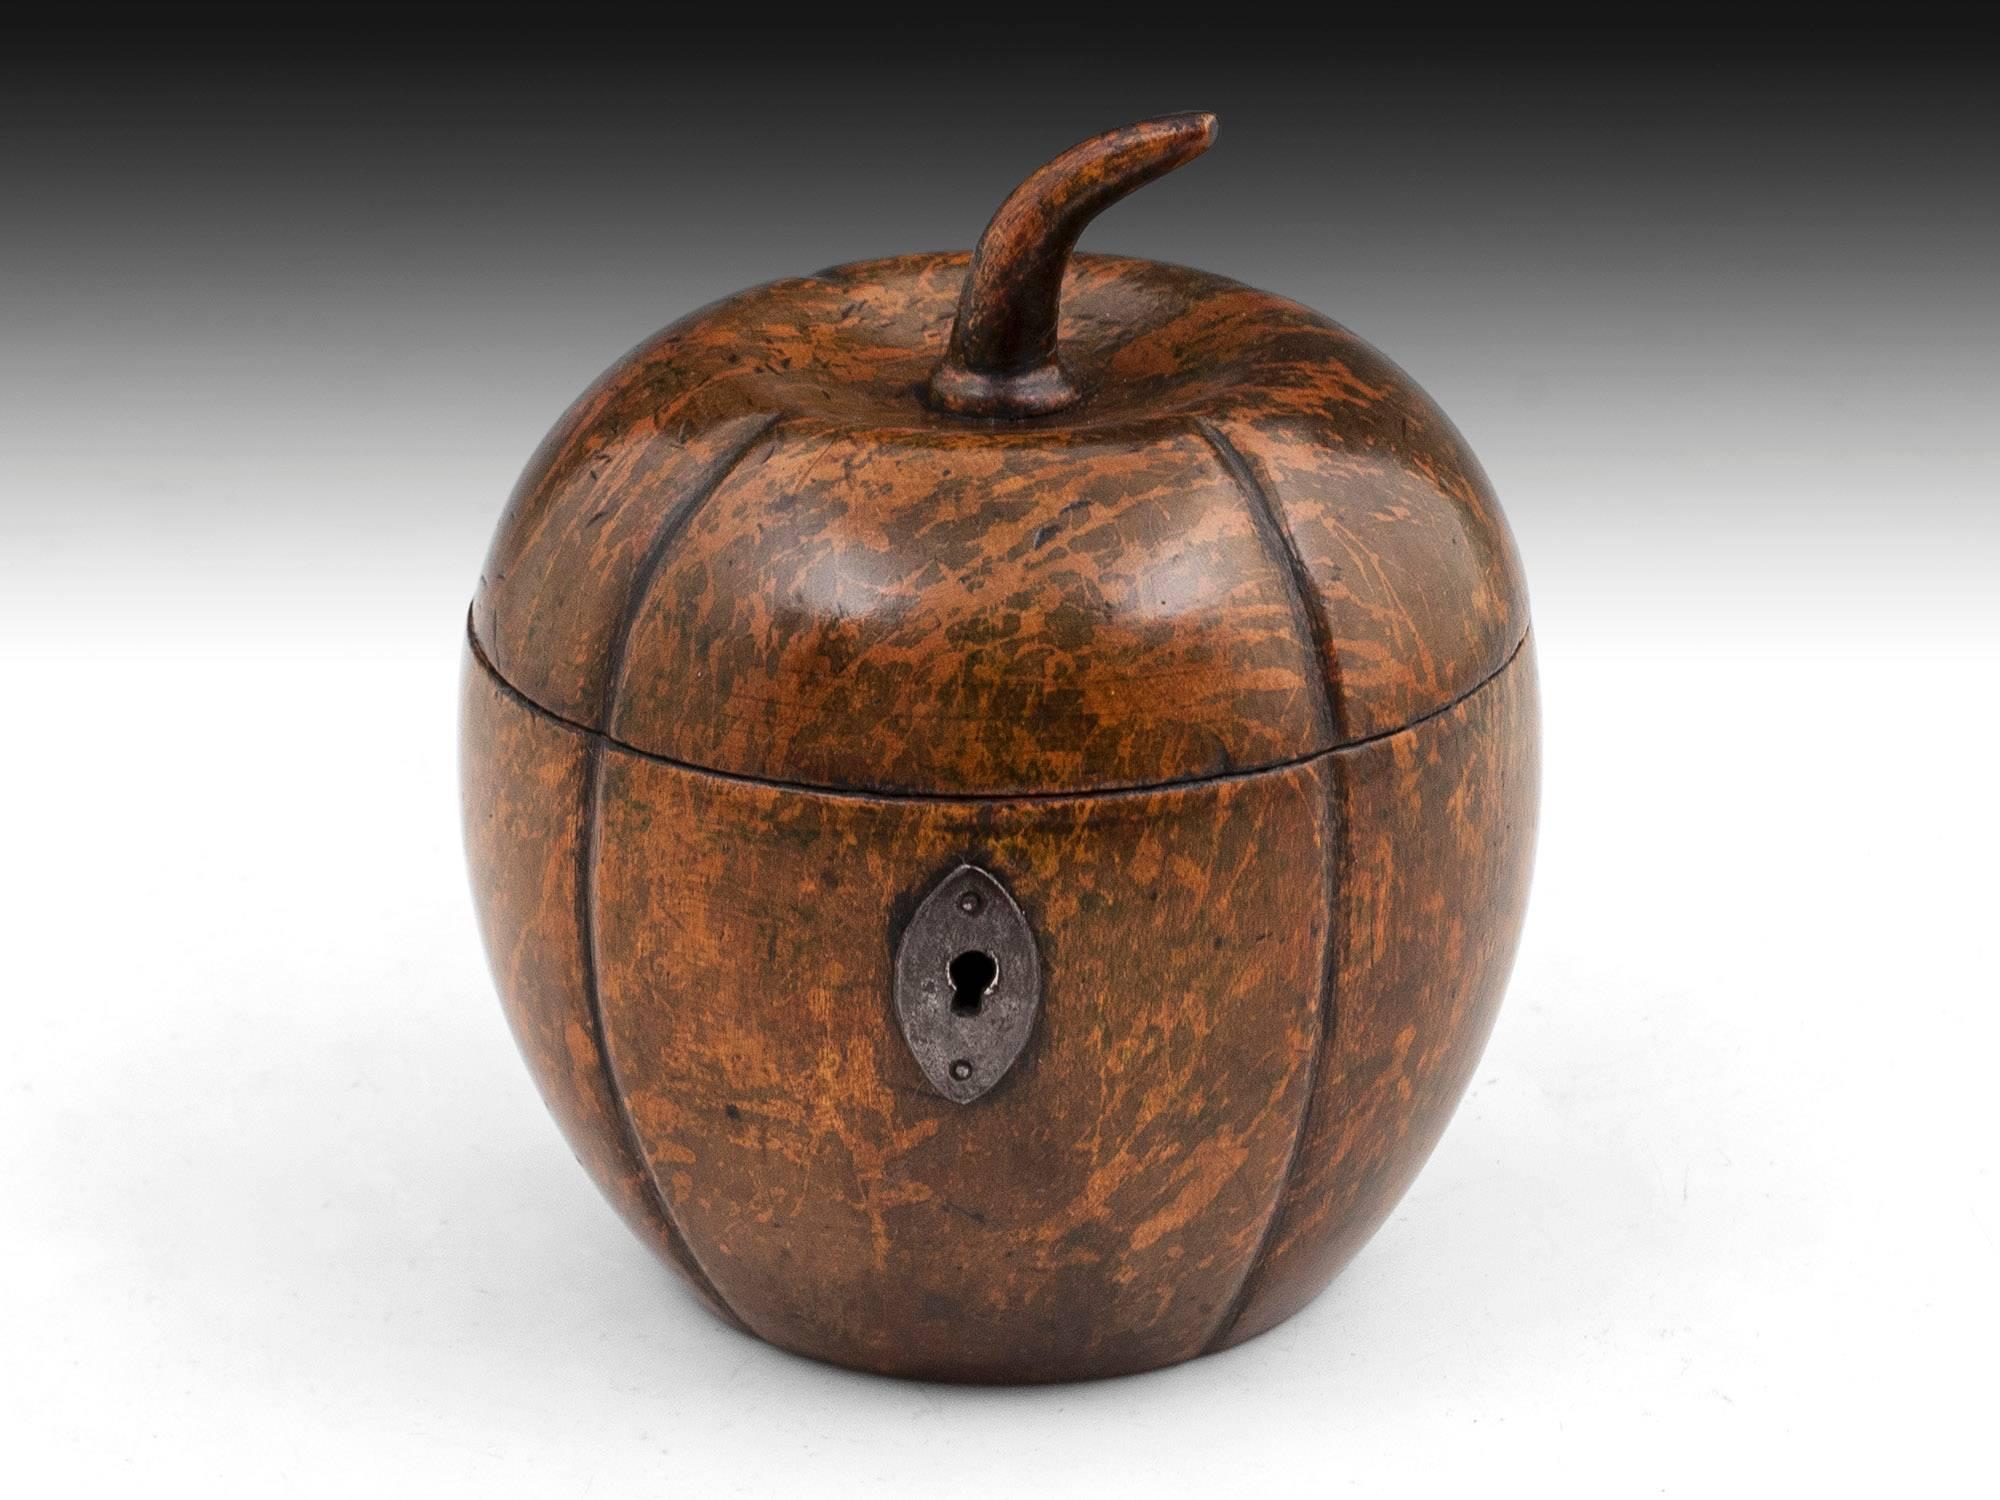 Fruitwood Melon Tea Caddy with a fantastic green and brown mottled decoration and superb patination. Featuring a steel lock, hinge and escutcheon. 

Melon tea caddies are much rarer and more sought after of the fruit tea caddies, patination and